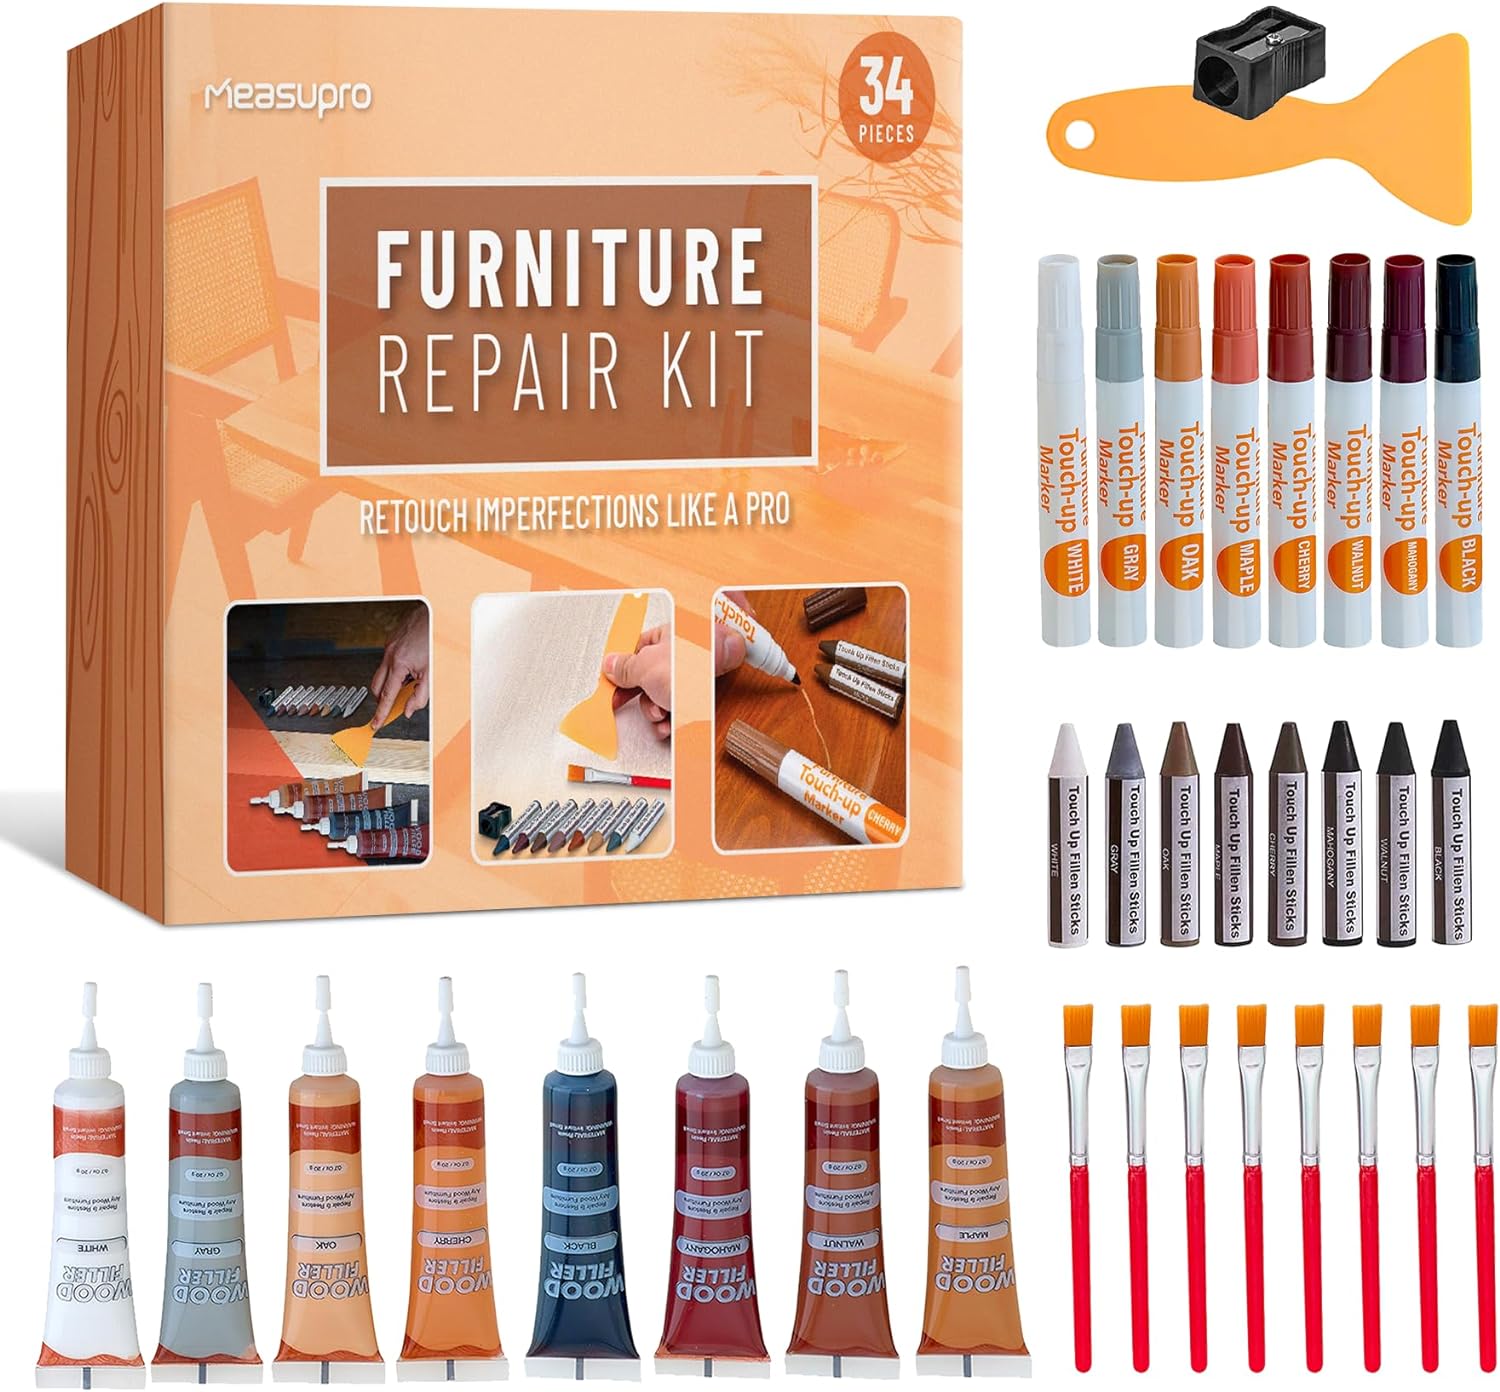 Furniture Repair Kit 34PC - Brushes, Markers, Scraper, Resin Wood Filler, Fillers with Wood Putty, Any Color Wood Combination, Scratch Repair